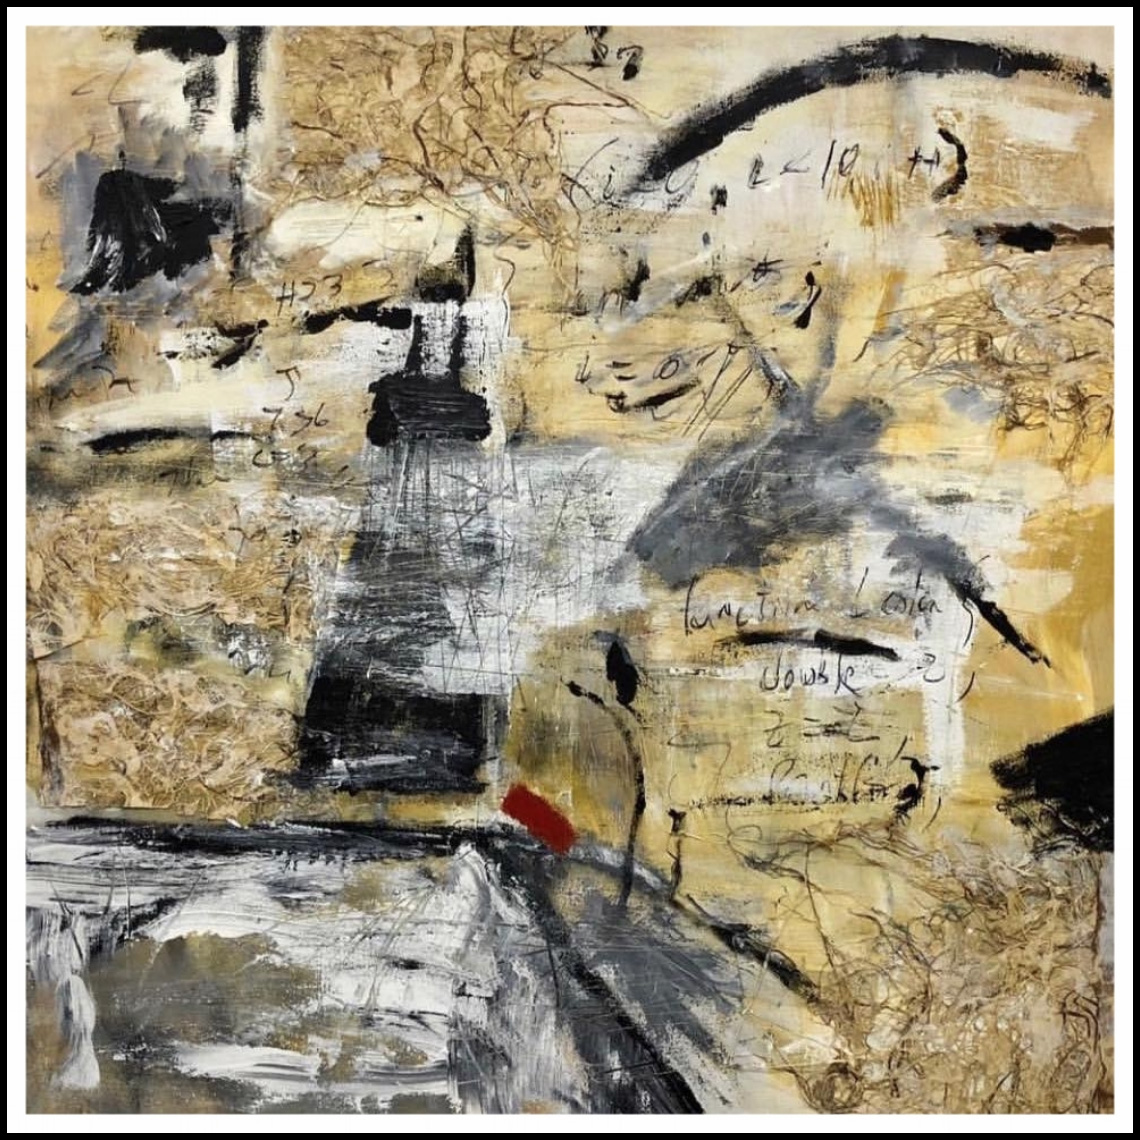   LOSS FOR WORDS   34”x 36” acrylic, charcoal, collage on canvas,  SOLD    